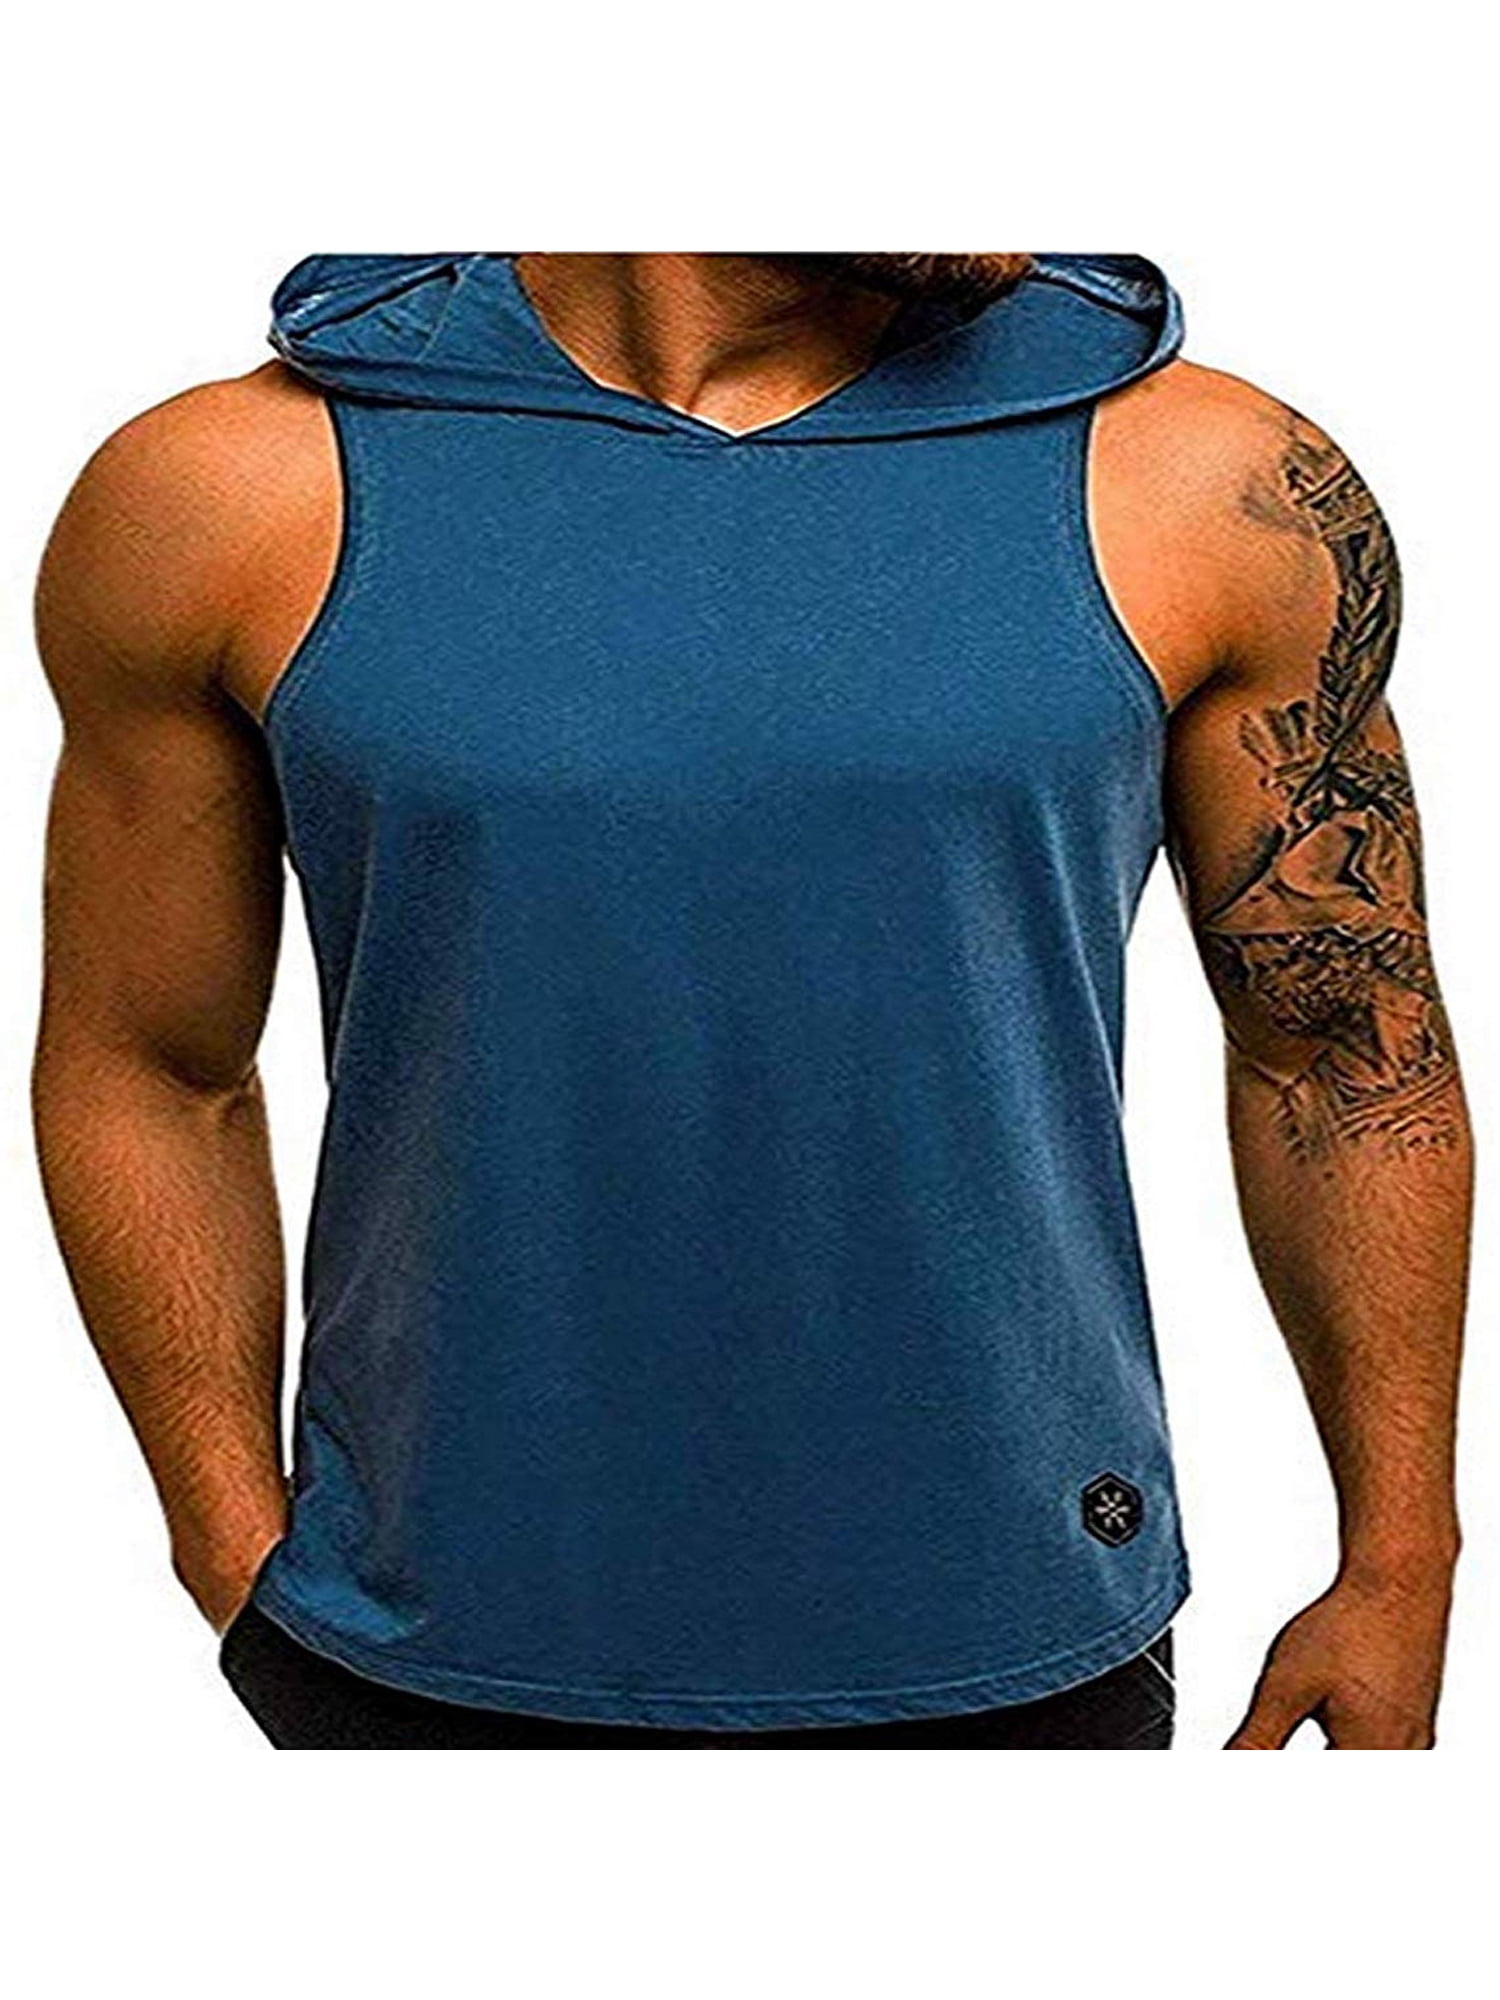 Fiomva Mens Slim Fit Sleeveless Shirts Hooded Tops Muscle Hoodie Casual ...